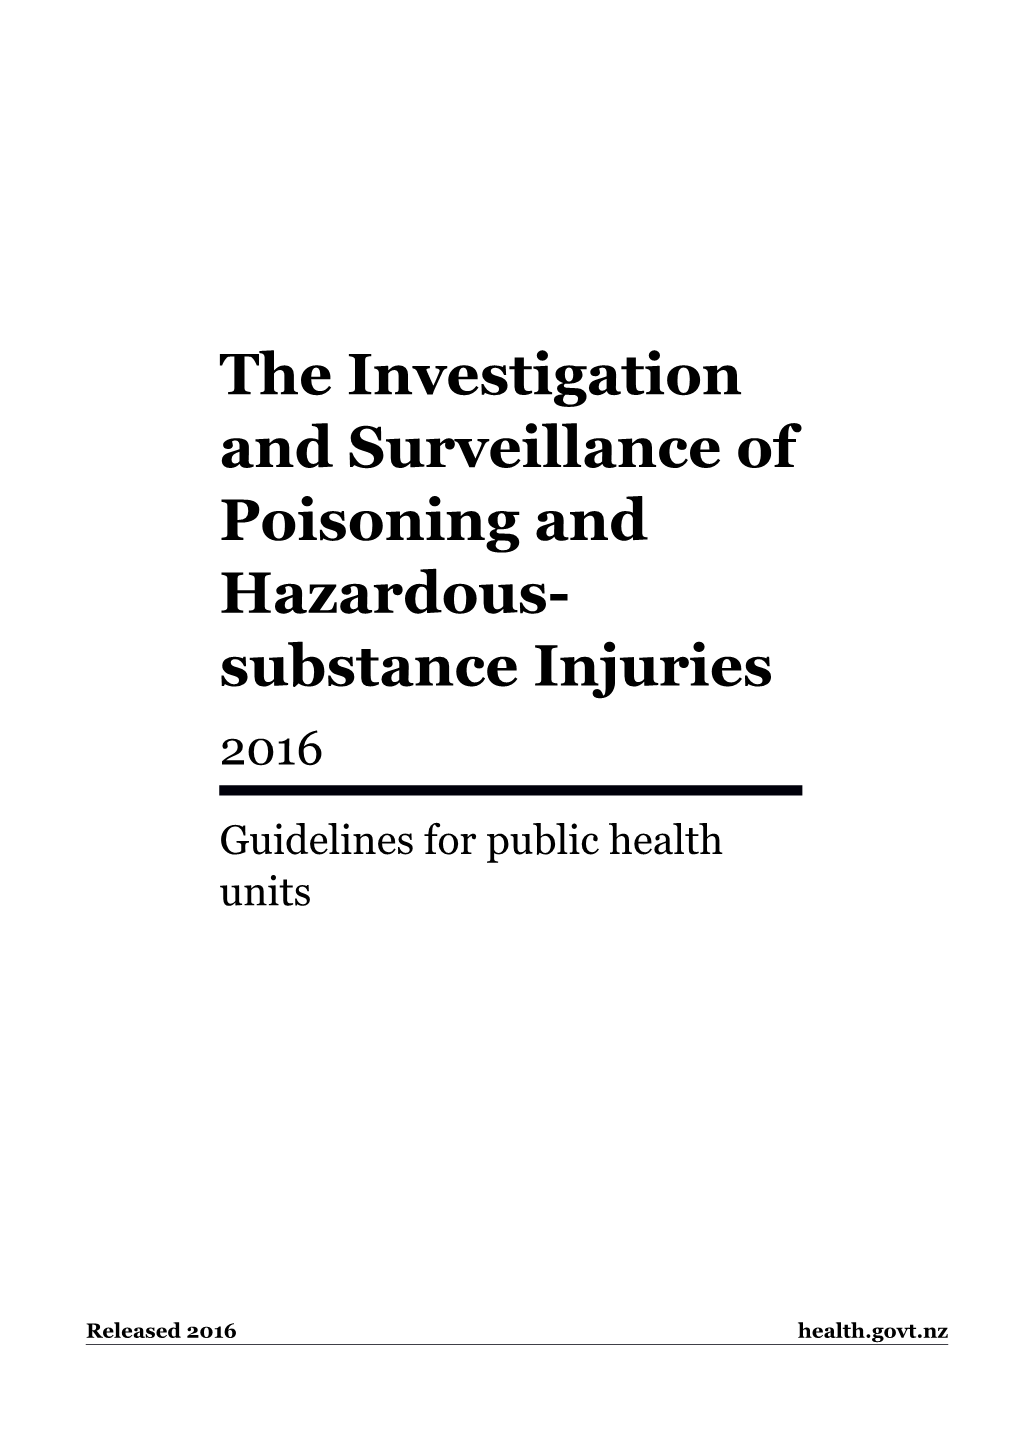 The Investigation and Surveillance of Poisoning and Hazardous-Substance Injuries 3Rd Edn 2016